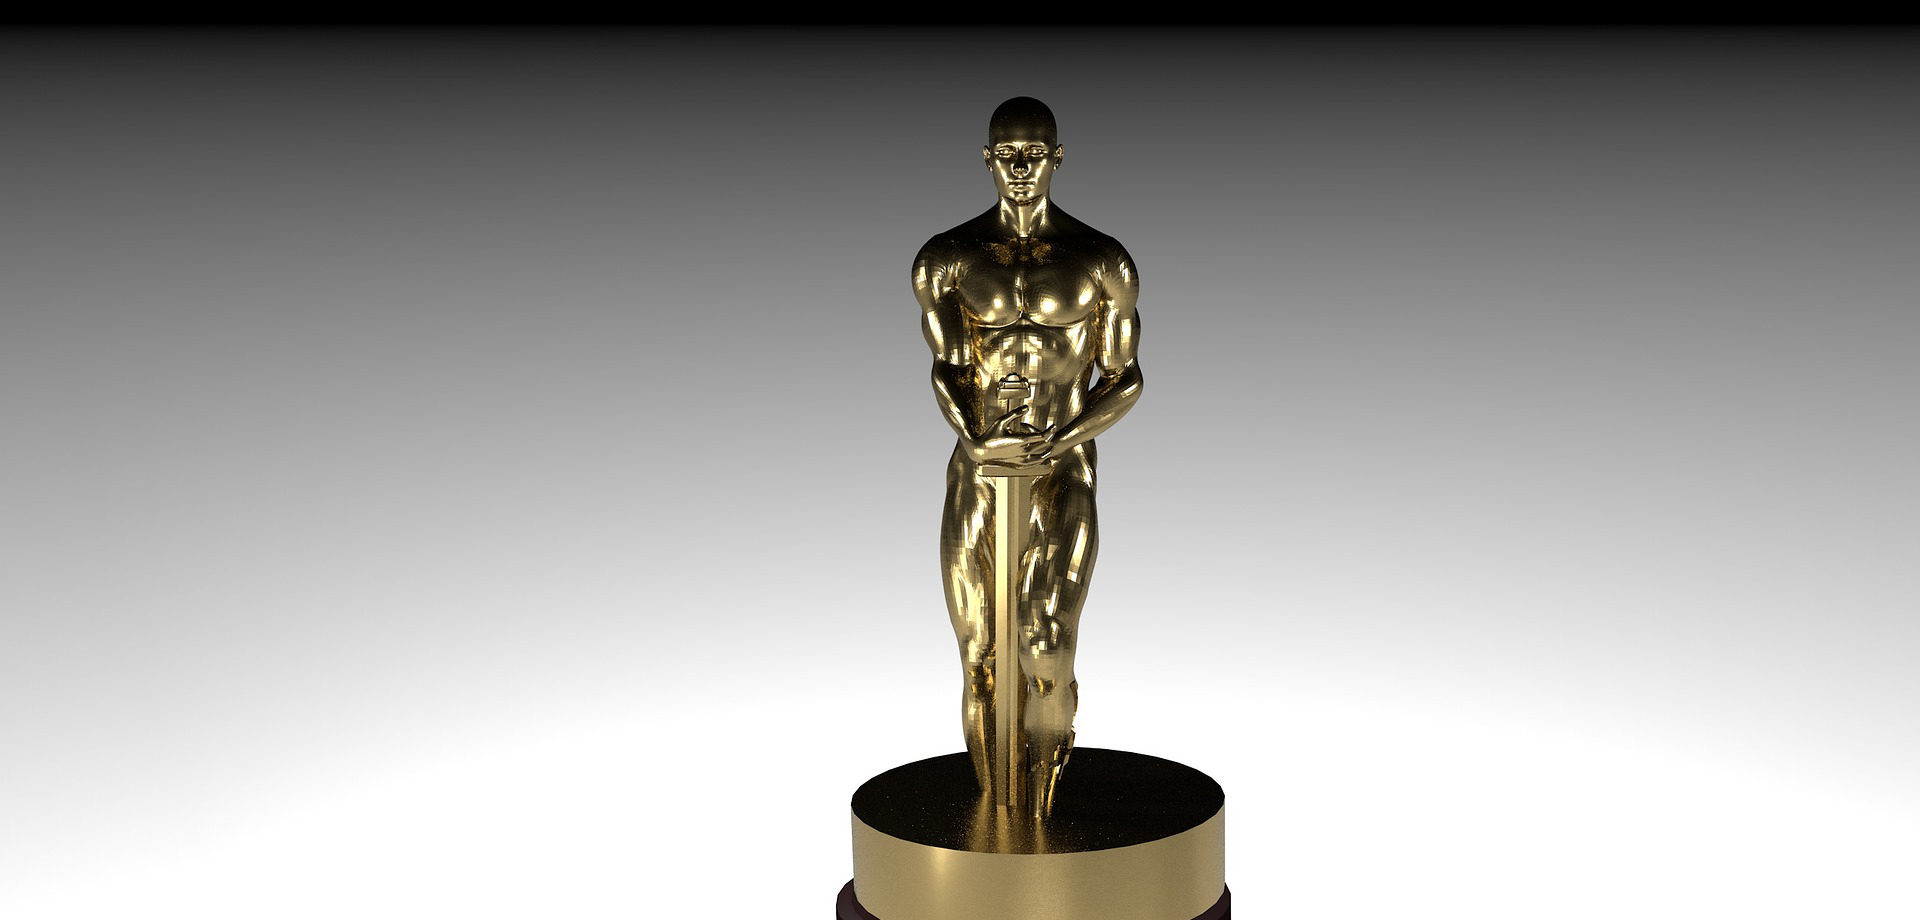 And the Academy Award goes to…